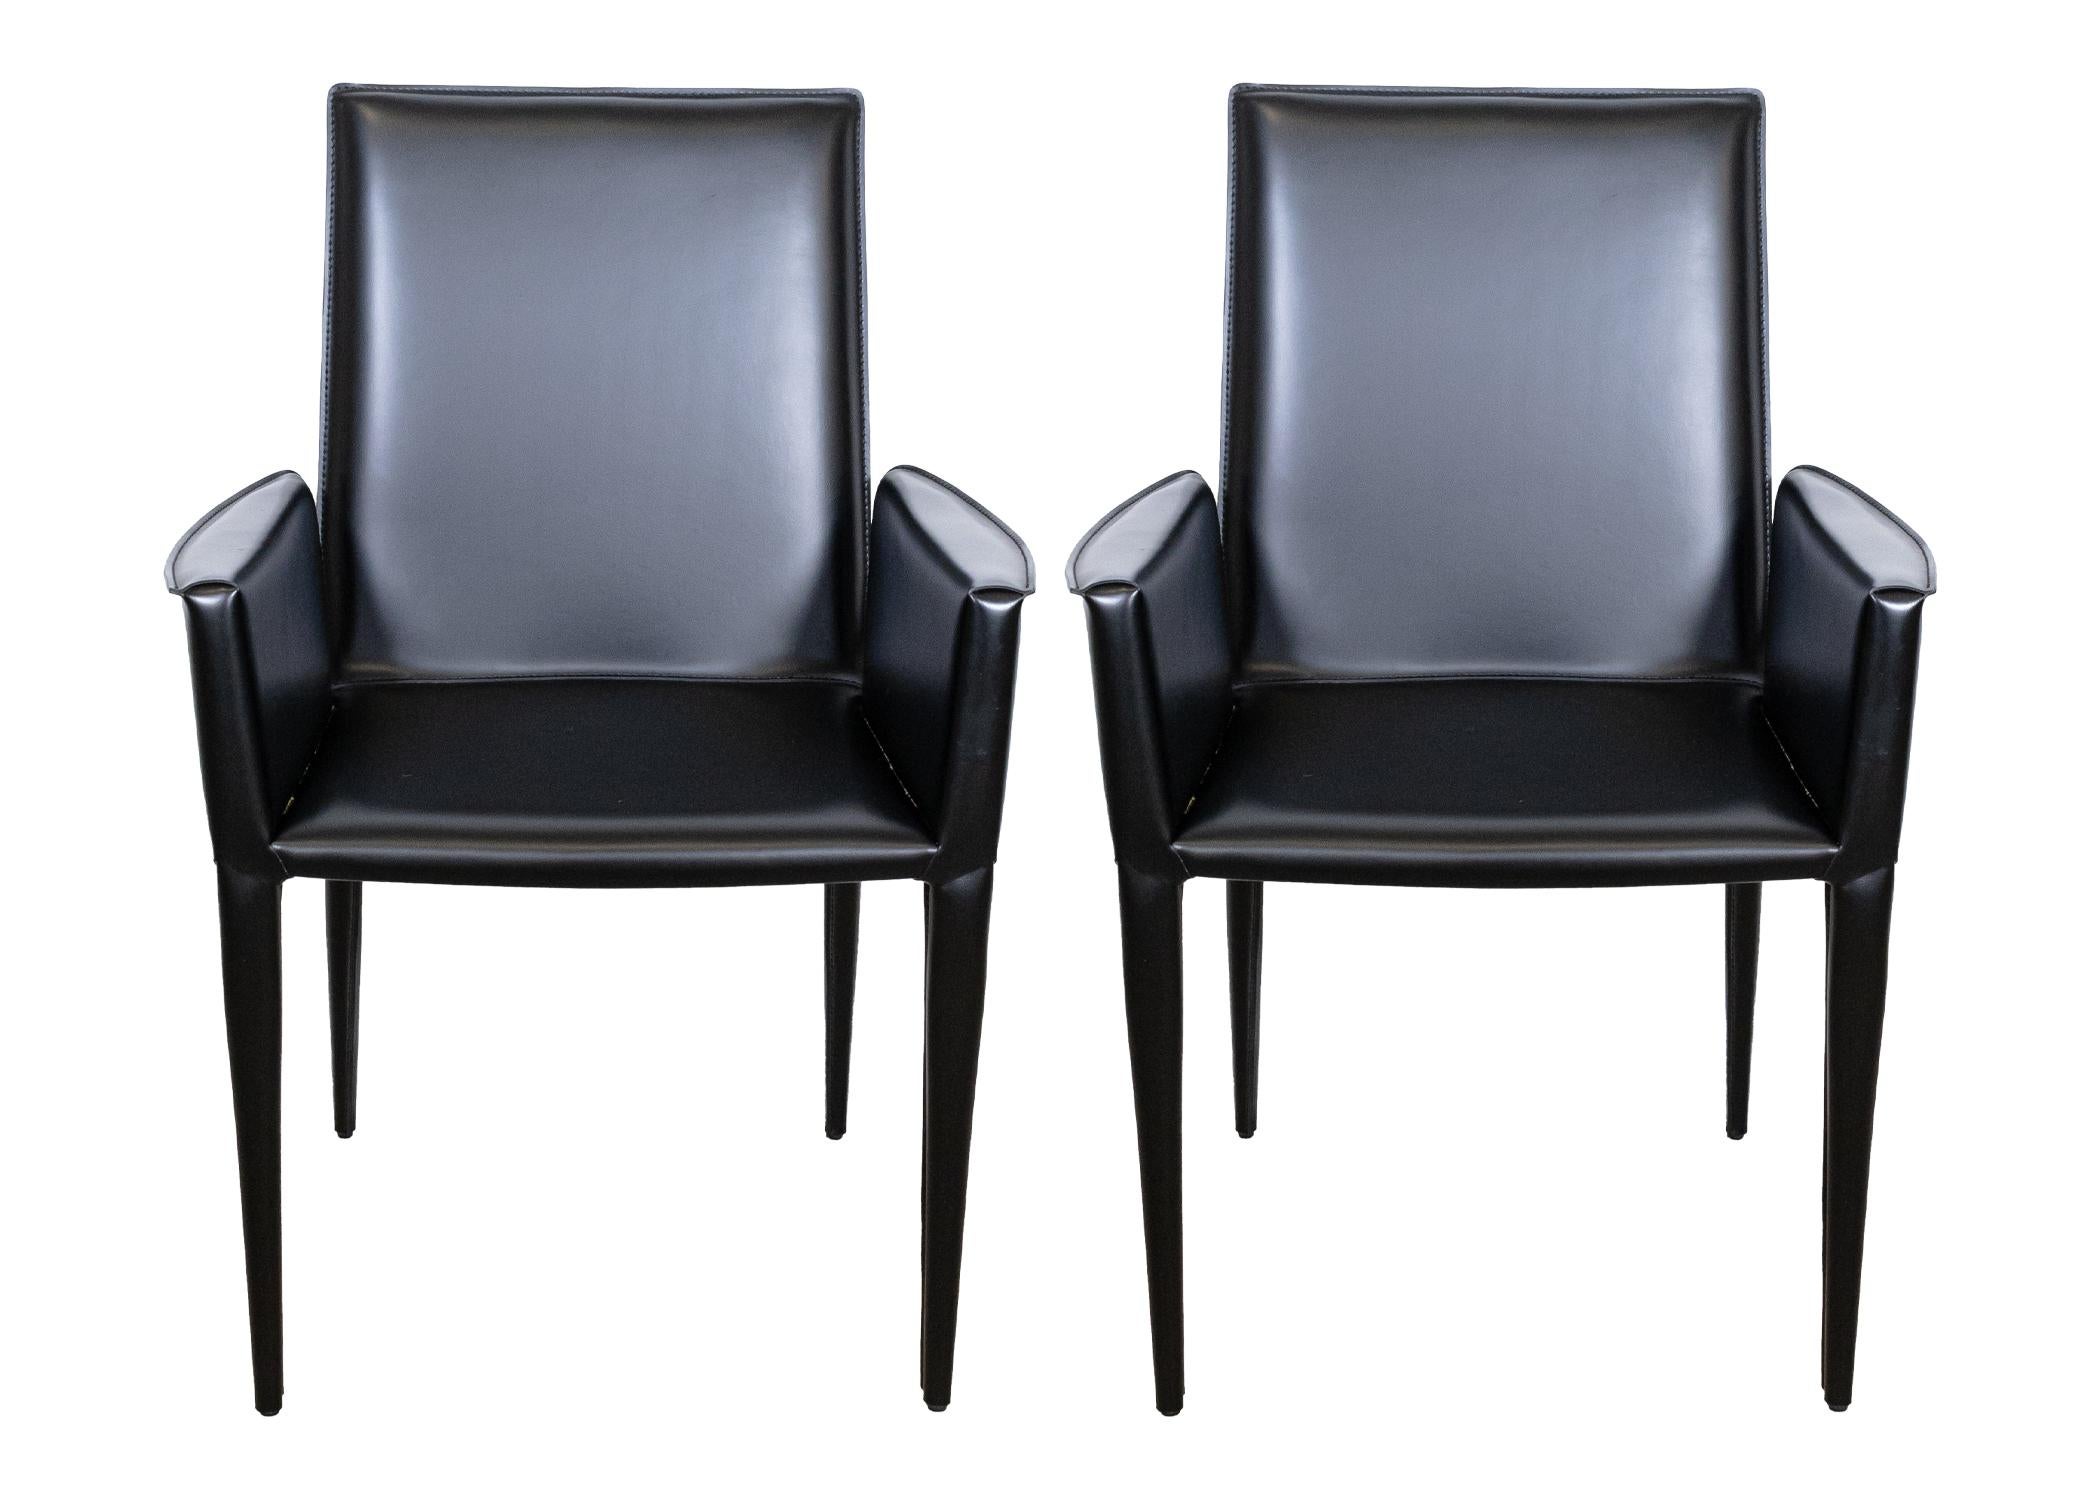 Set of 6 Frag Italian black leather dining chairs. This gorgeous set of black Italian leather chairs feature a two chair design. Two chairs for the end of the table have arms, and the four middle chairs are armless. All six of the chairs are in very